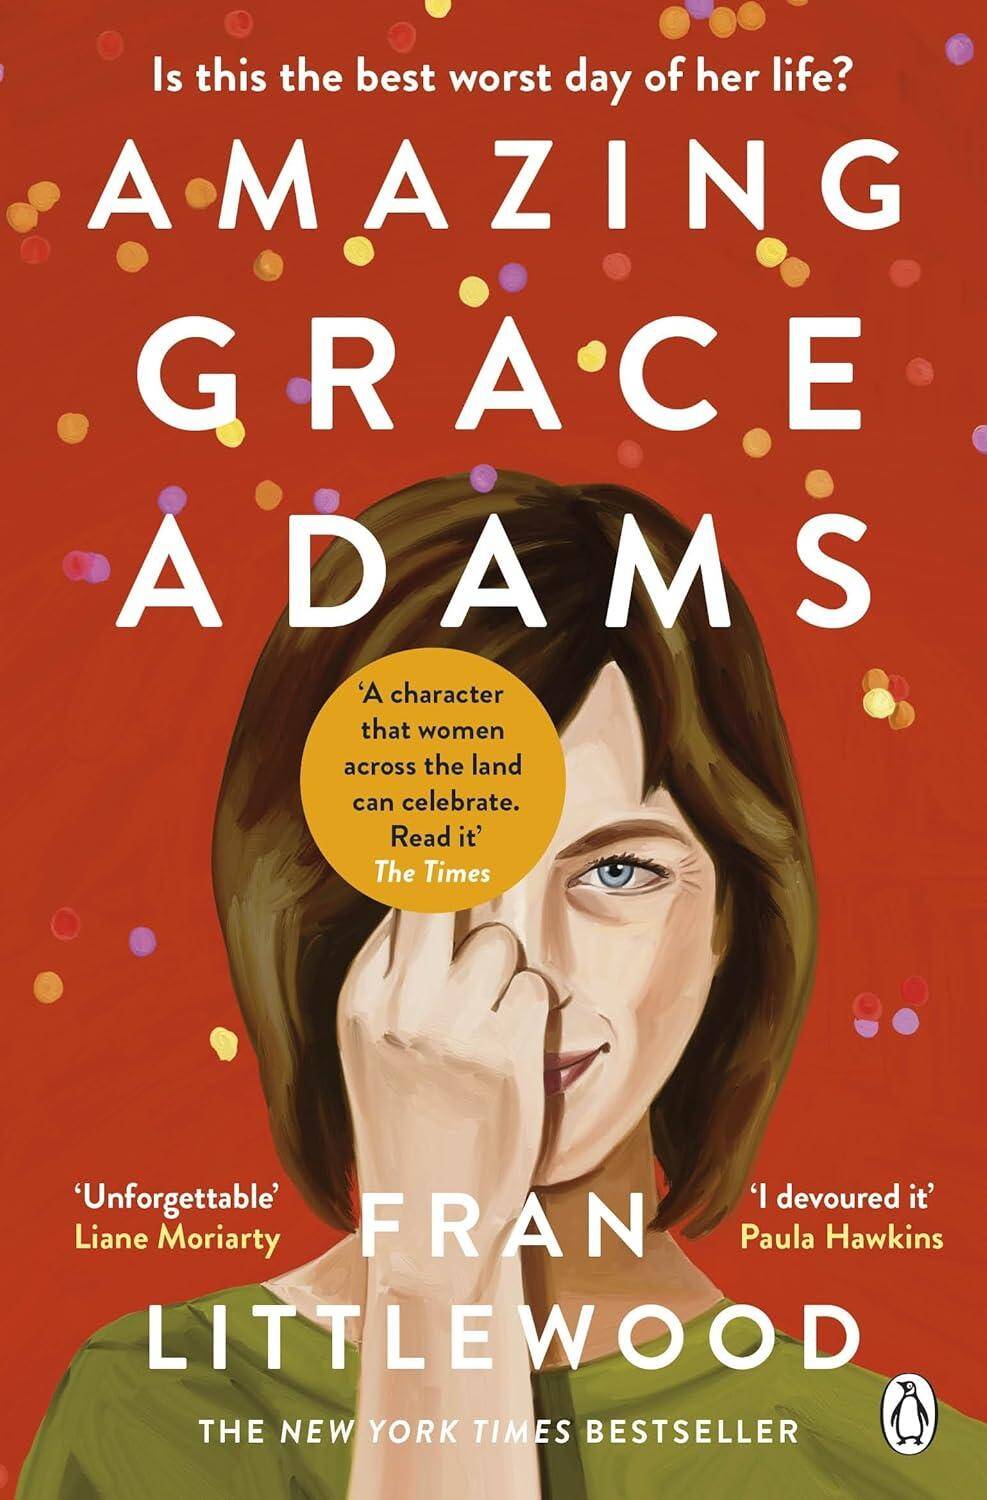 Amazing Grace Adams : The New York Times Bestseller and Read With Jenna Book Club Pick